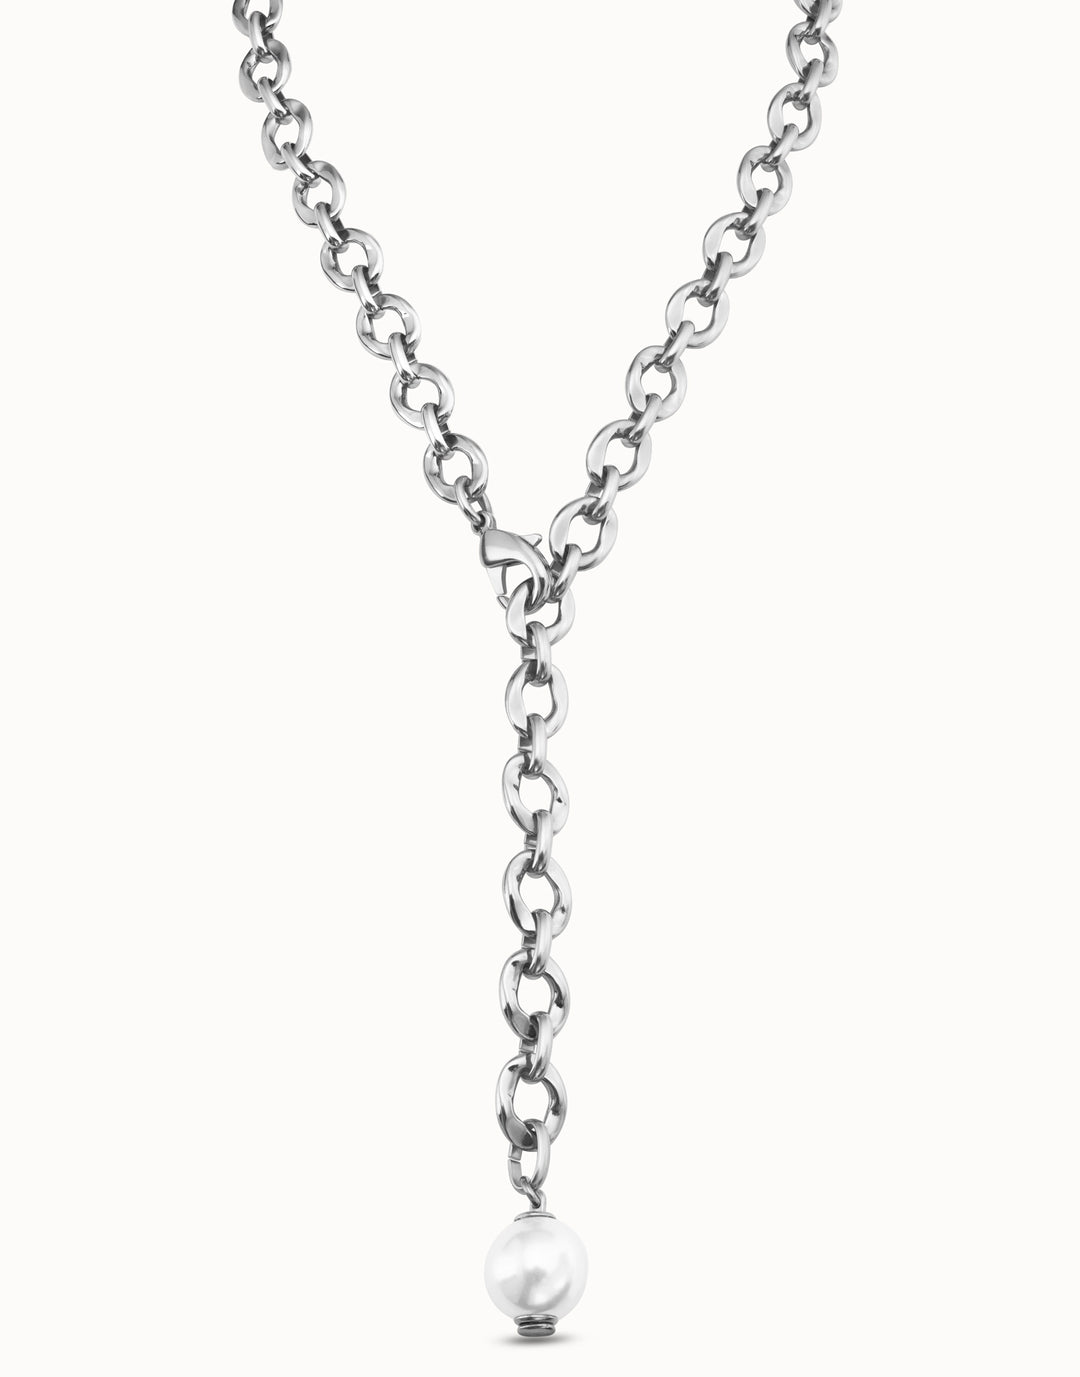 JOY OF LIVING NECKLACE-SILVER - Kingfisher Road - Online Boutique